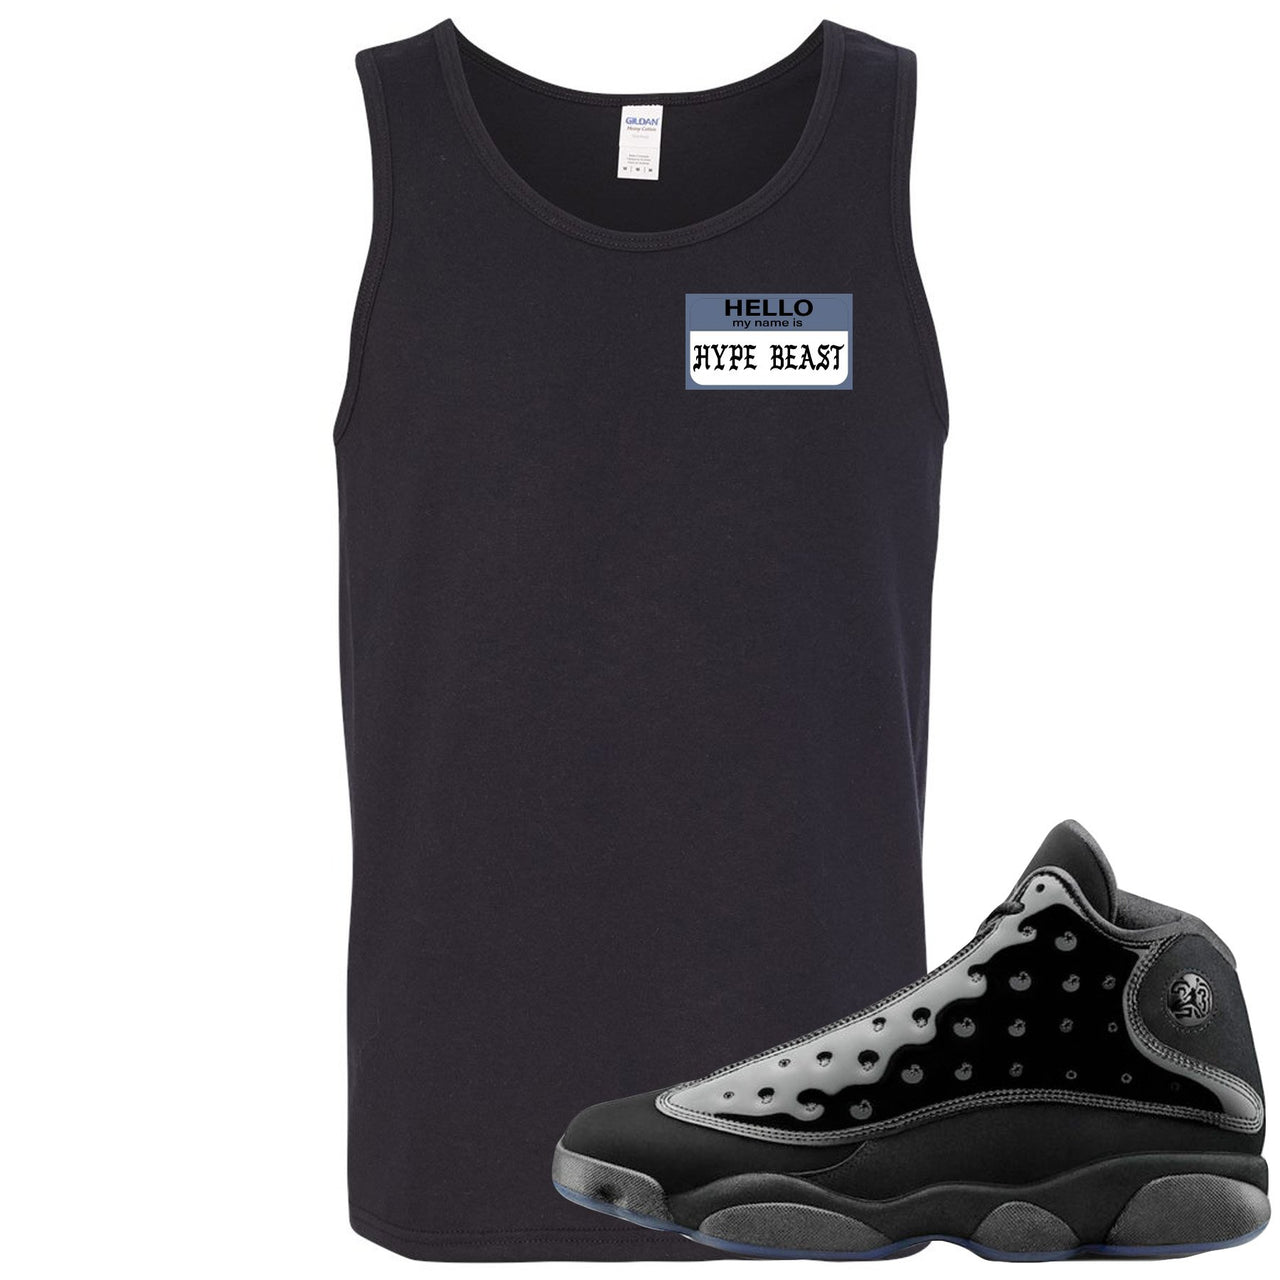 Cap and Gown 13s Mens Tank Top | Hello My Name is Hype Beast Pablo Style, Black